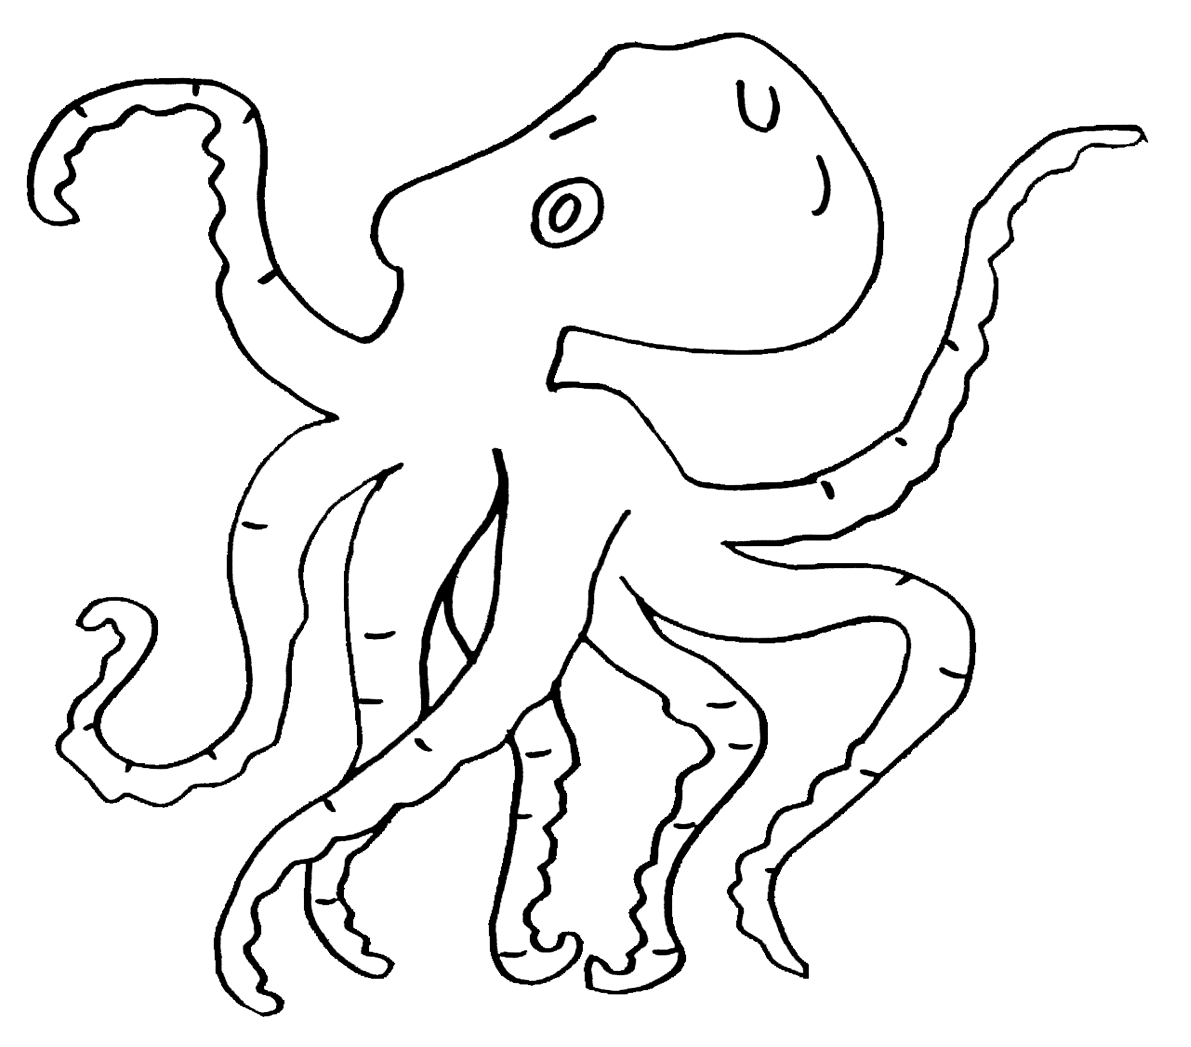 printable coloring pages octopus - photo #12